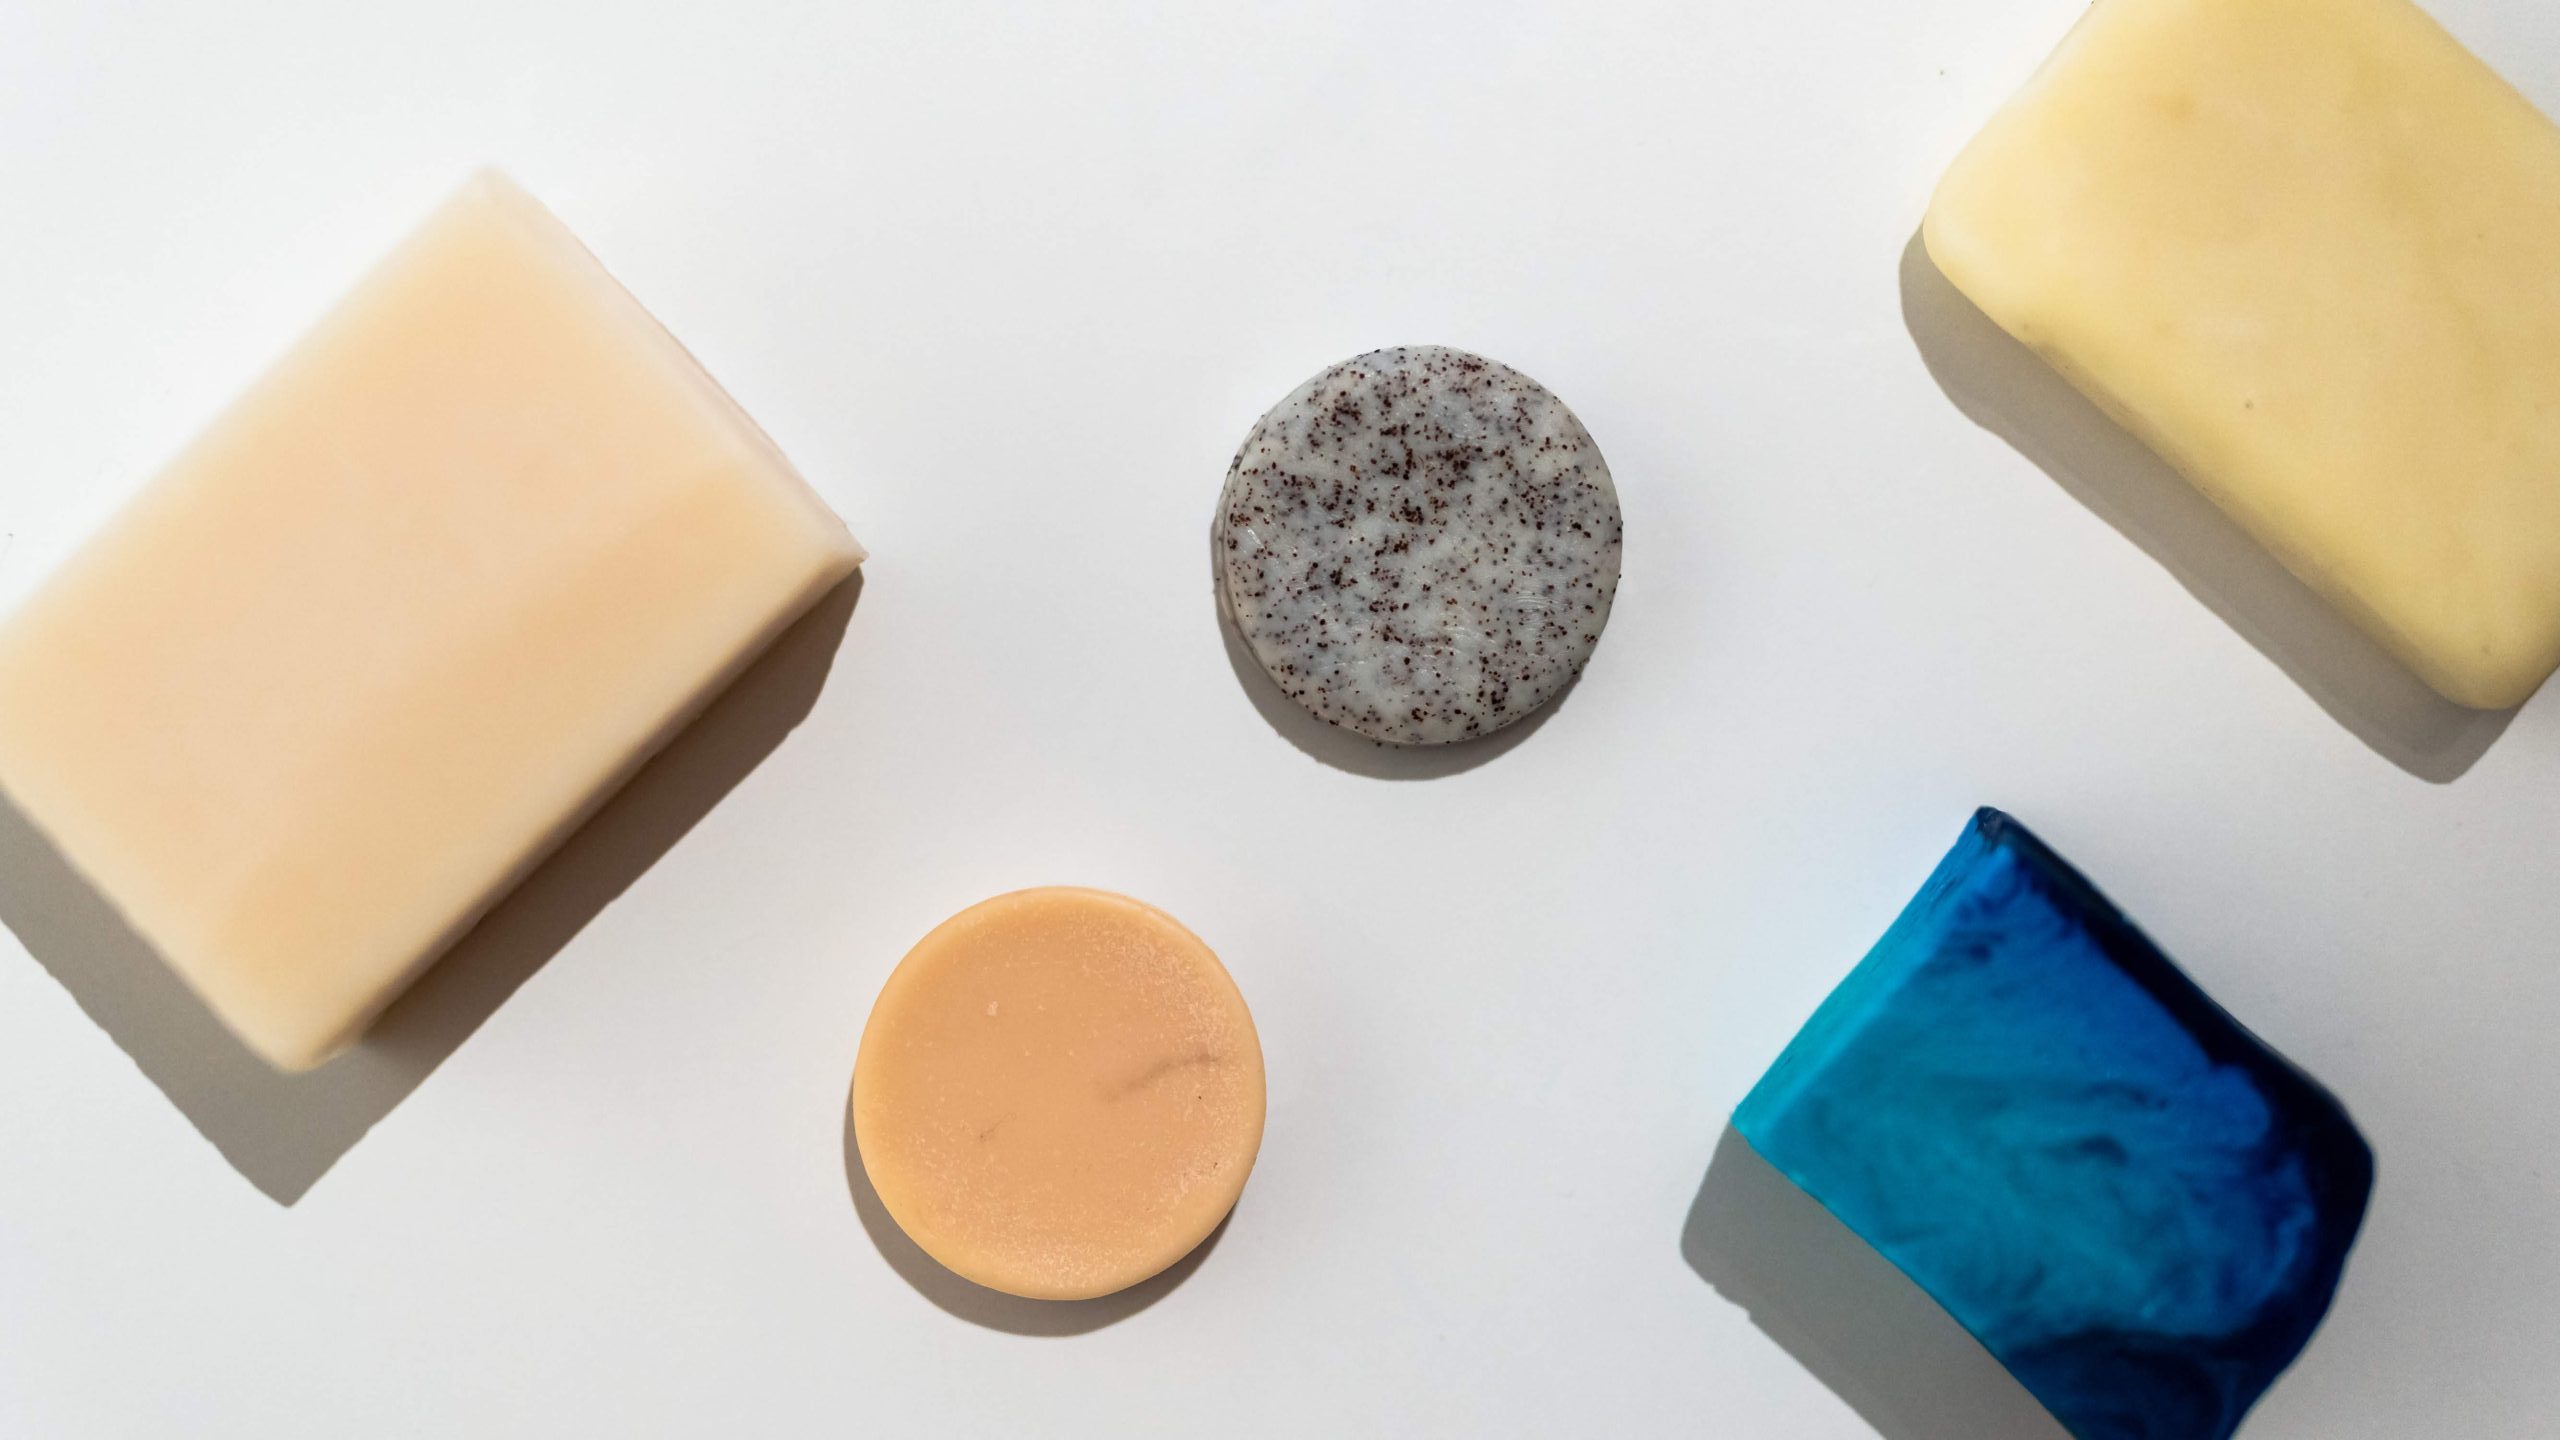 Lush solid toiletry bars